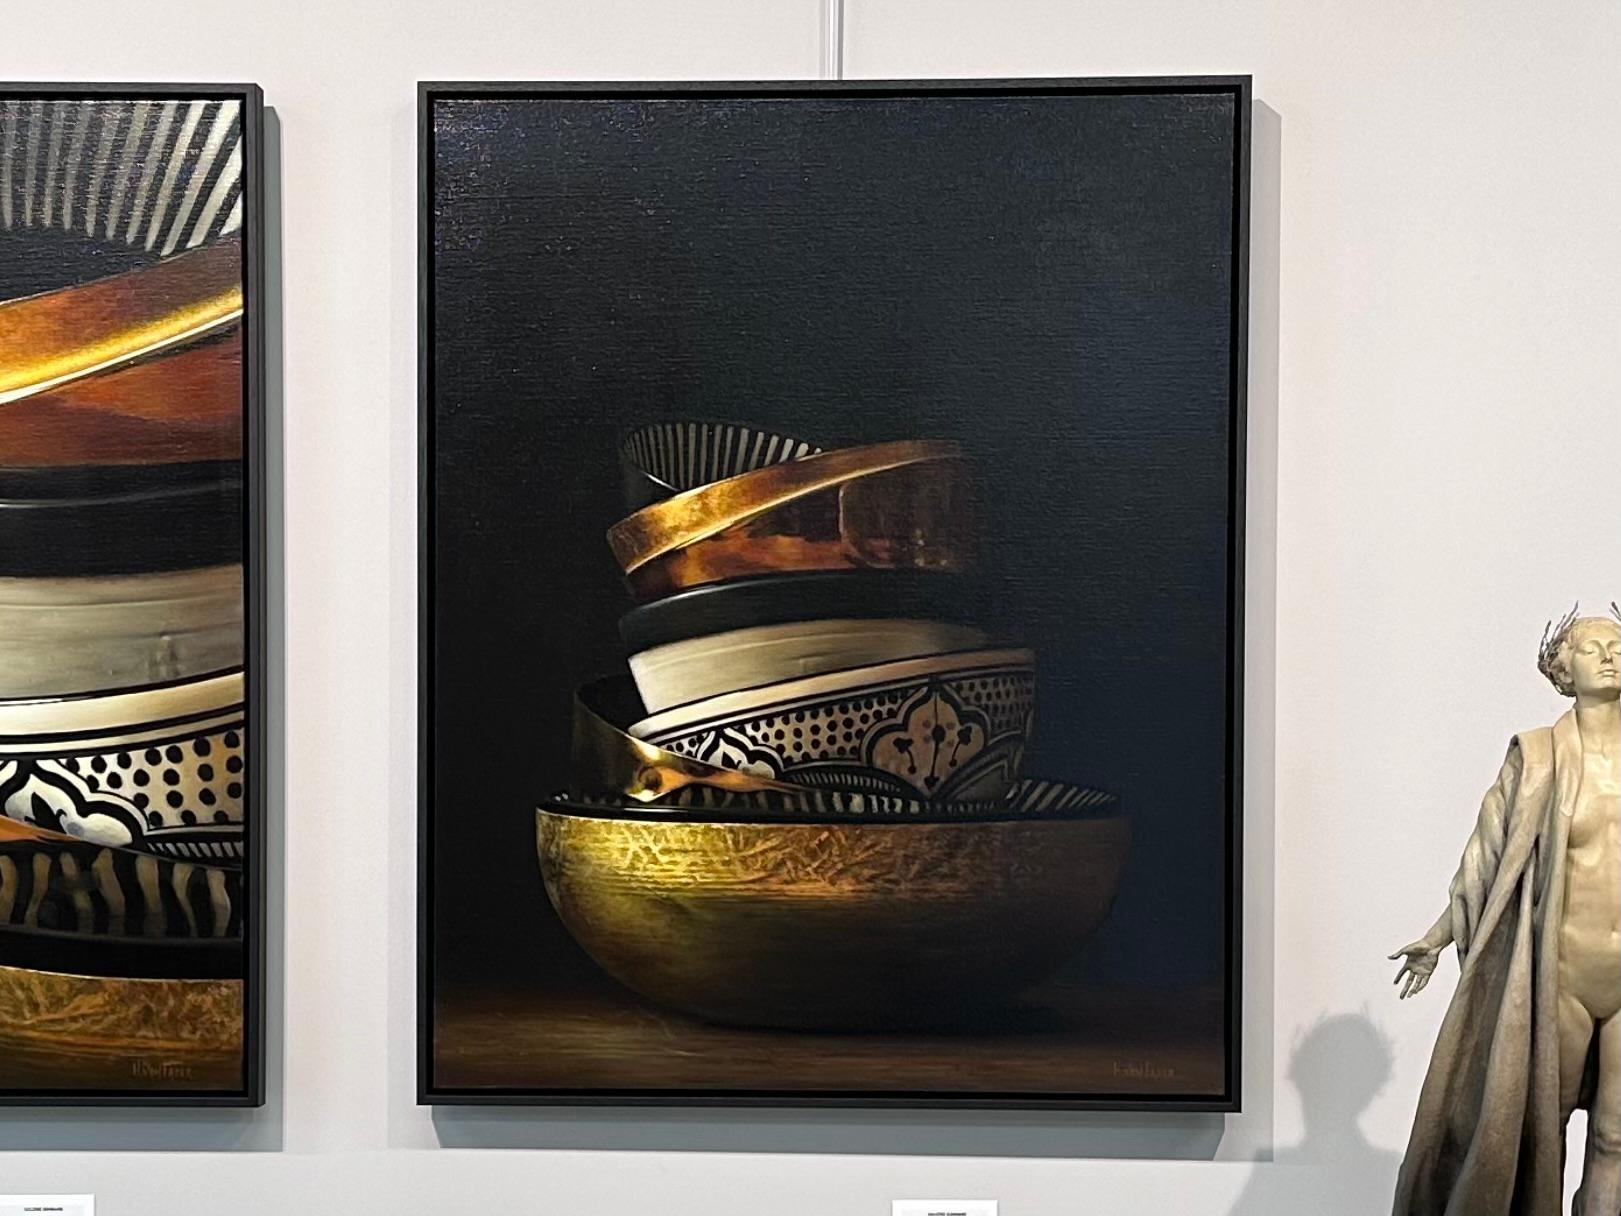 Heidi von Faber
Stack of Dishes II
Acrylic on linen
100 x 80 cm ( framed/ included in price 105 x 85 cm)

Dutch artist Heidi Von Faber lives and works in The Hague. 

The Stillllifes she paints are modern but made according the tradition of the old